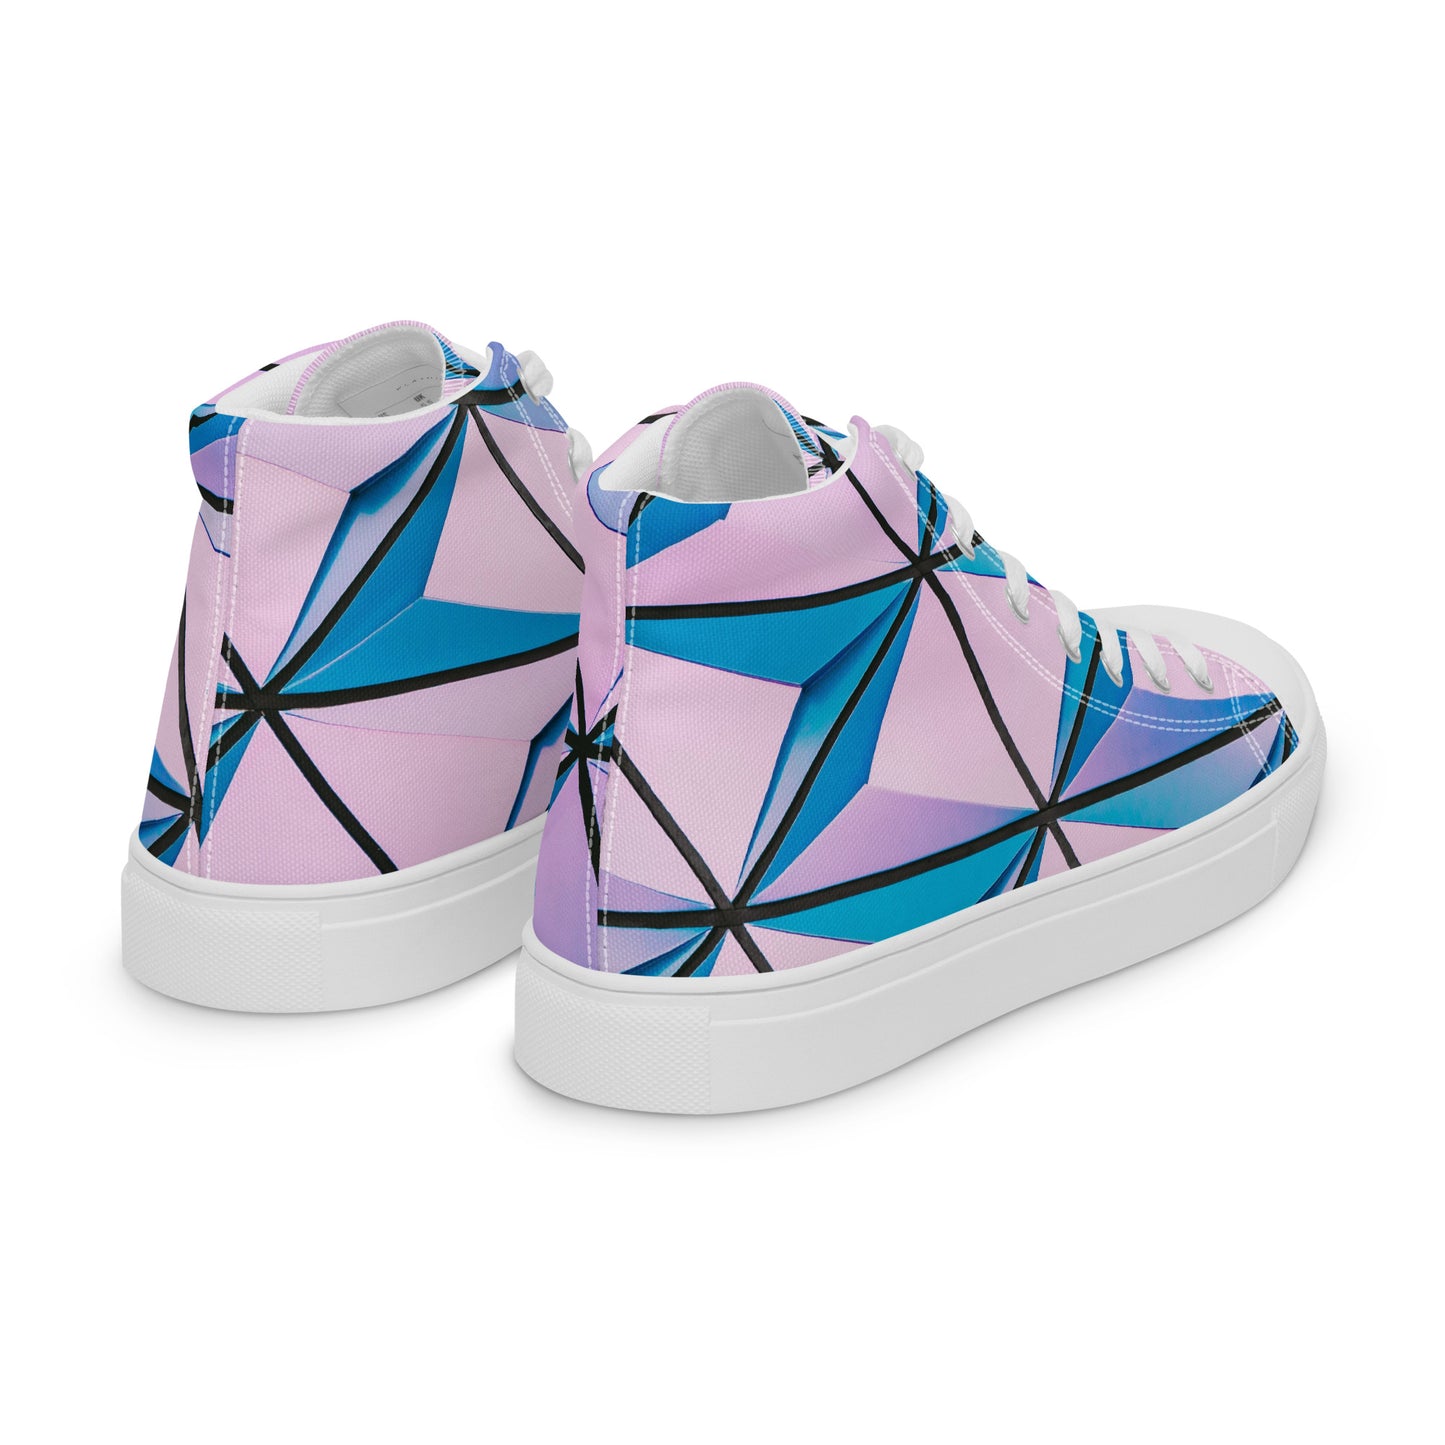 Lineage Of Angles Women's High Top Canvas Shoes